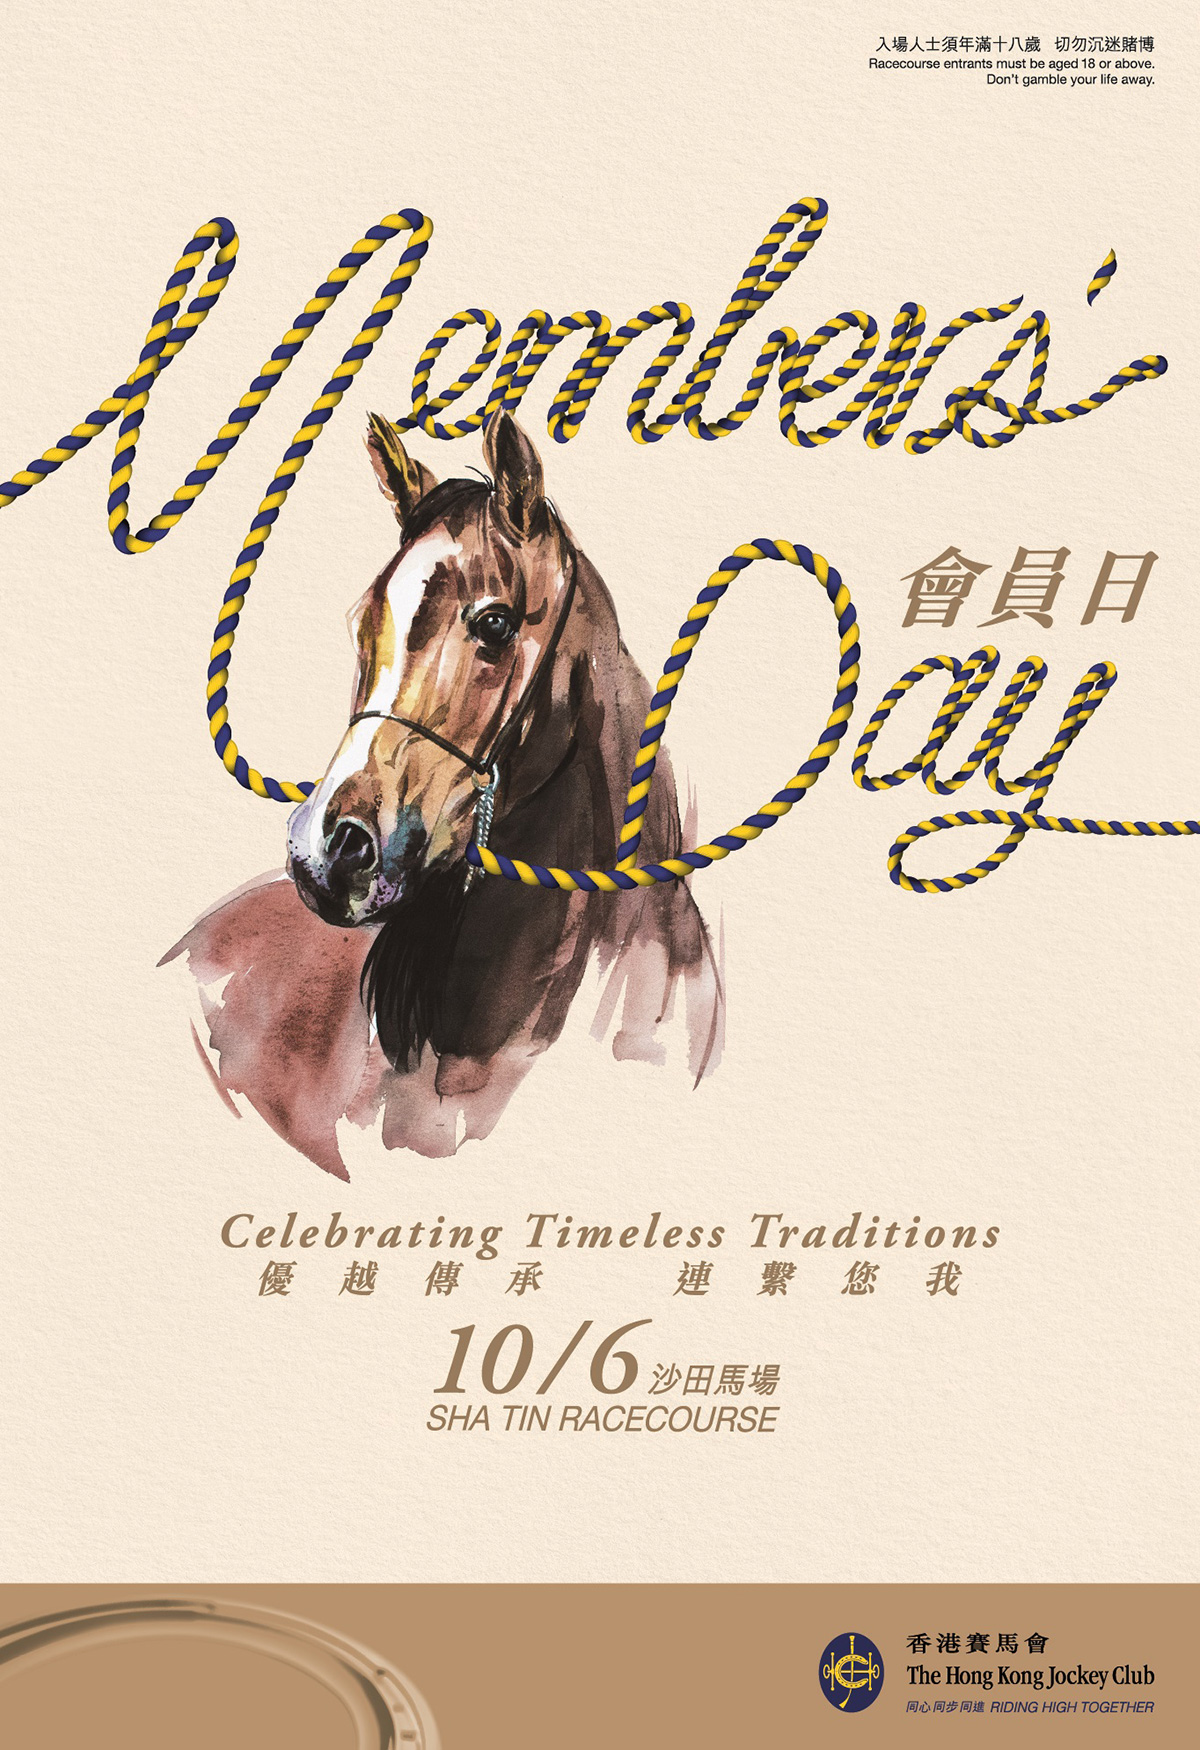 Hong Kong Jockey Club Members and their guests attending Sha Tin Racecourse this Sunday, 10 June, will enjoy a series of exclusive offers and gifts to mark the Club’s annual Members’ Day.